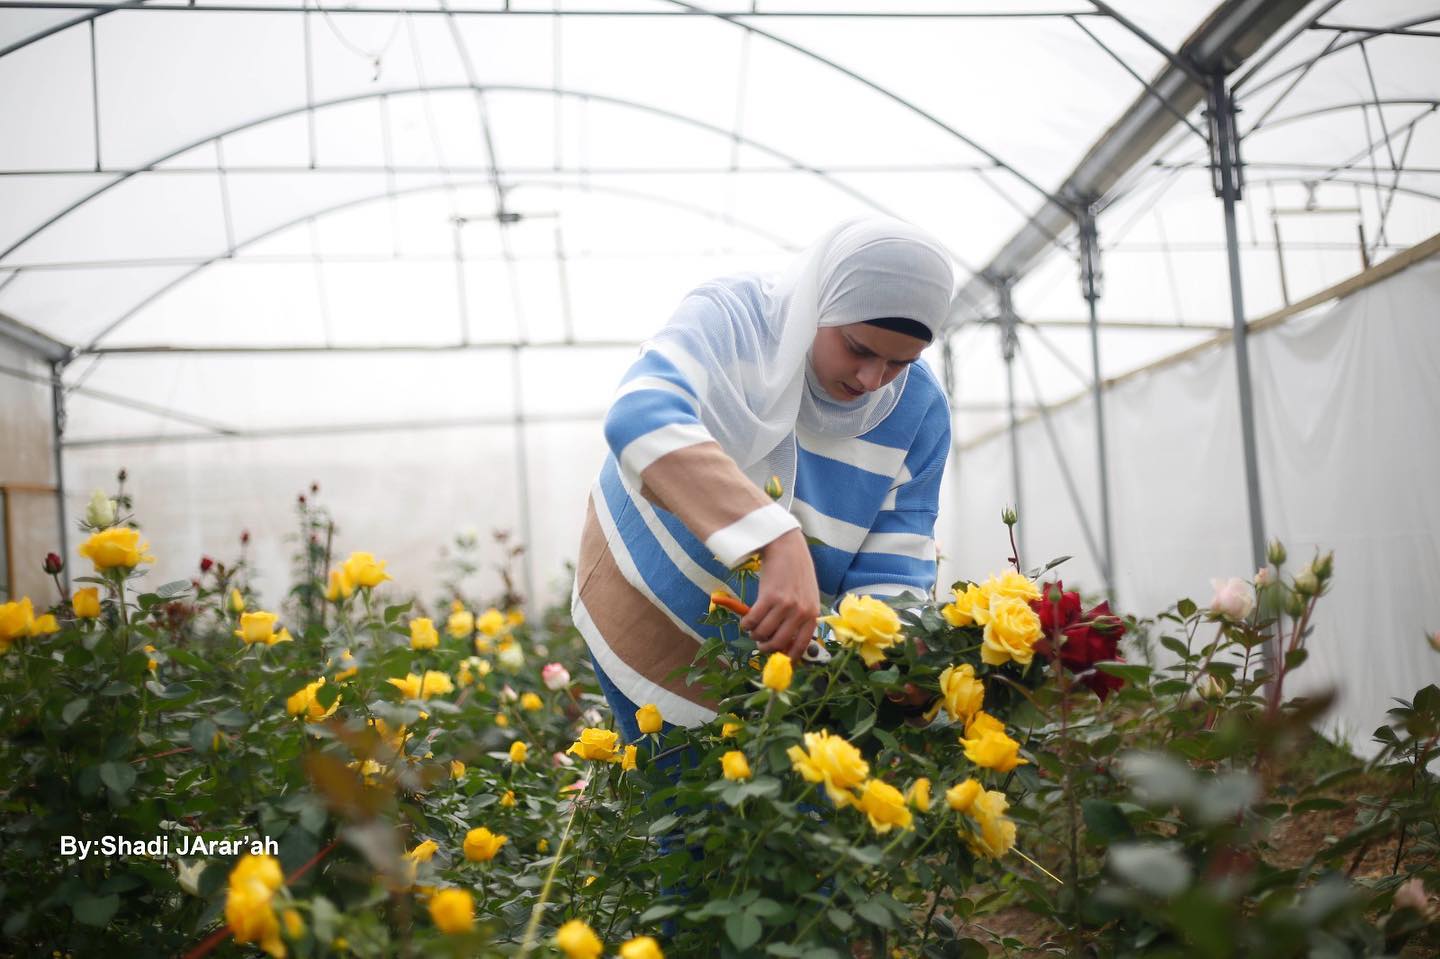 "To me, the planet symbolizes motherhood. It protects, supports, and nurtures." – Farah, a young Palestinian entrepreneur who built her flower shop #greenbusiness, Flowerland, using recycled wastewater. 
Through @gimed_enicbcmed project, Farah transformed her vision into reality and improved her business's competitiveness in the local market. 
@enicbcmed #GOMED